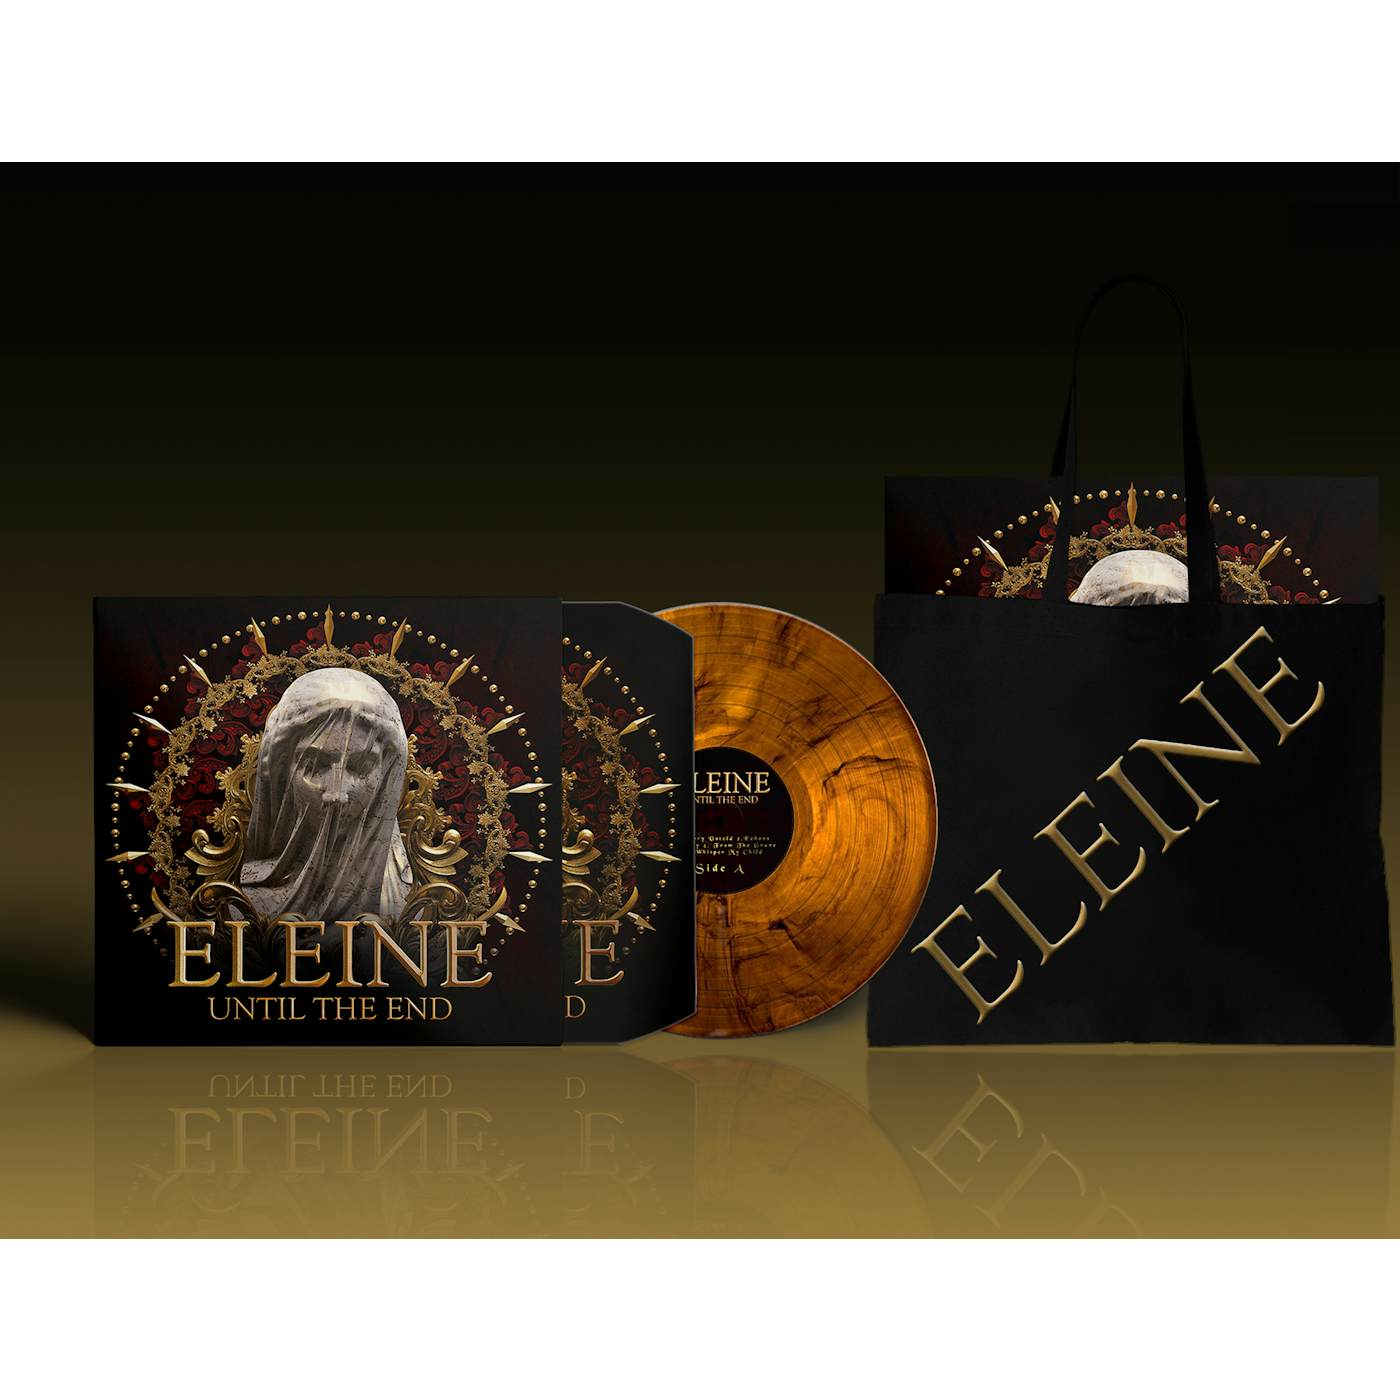 Eleine UNTIL THE END (TOTE BAG) - Limited Edition Gold Colored Vinyl Record